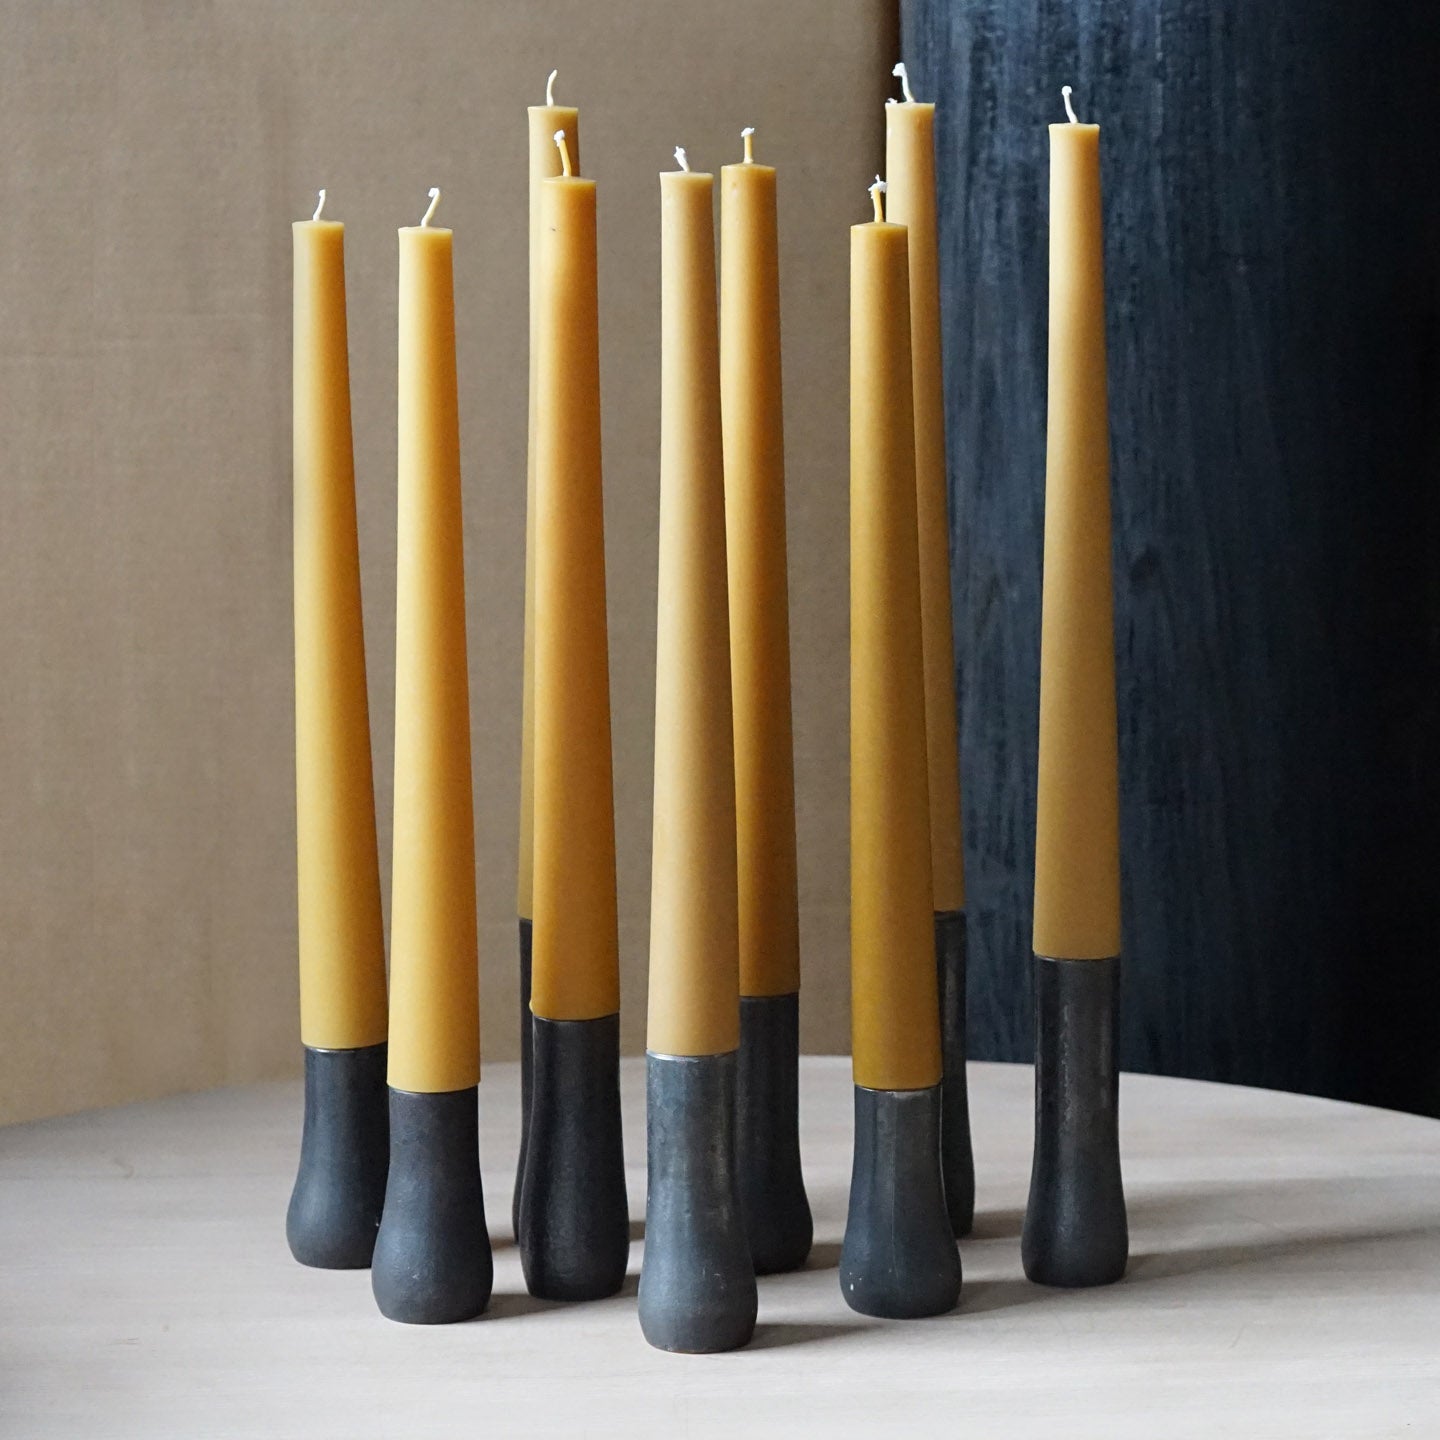 9 Grove candles placed together atop of a table